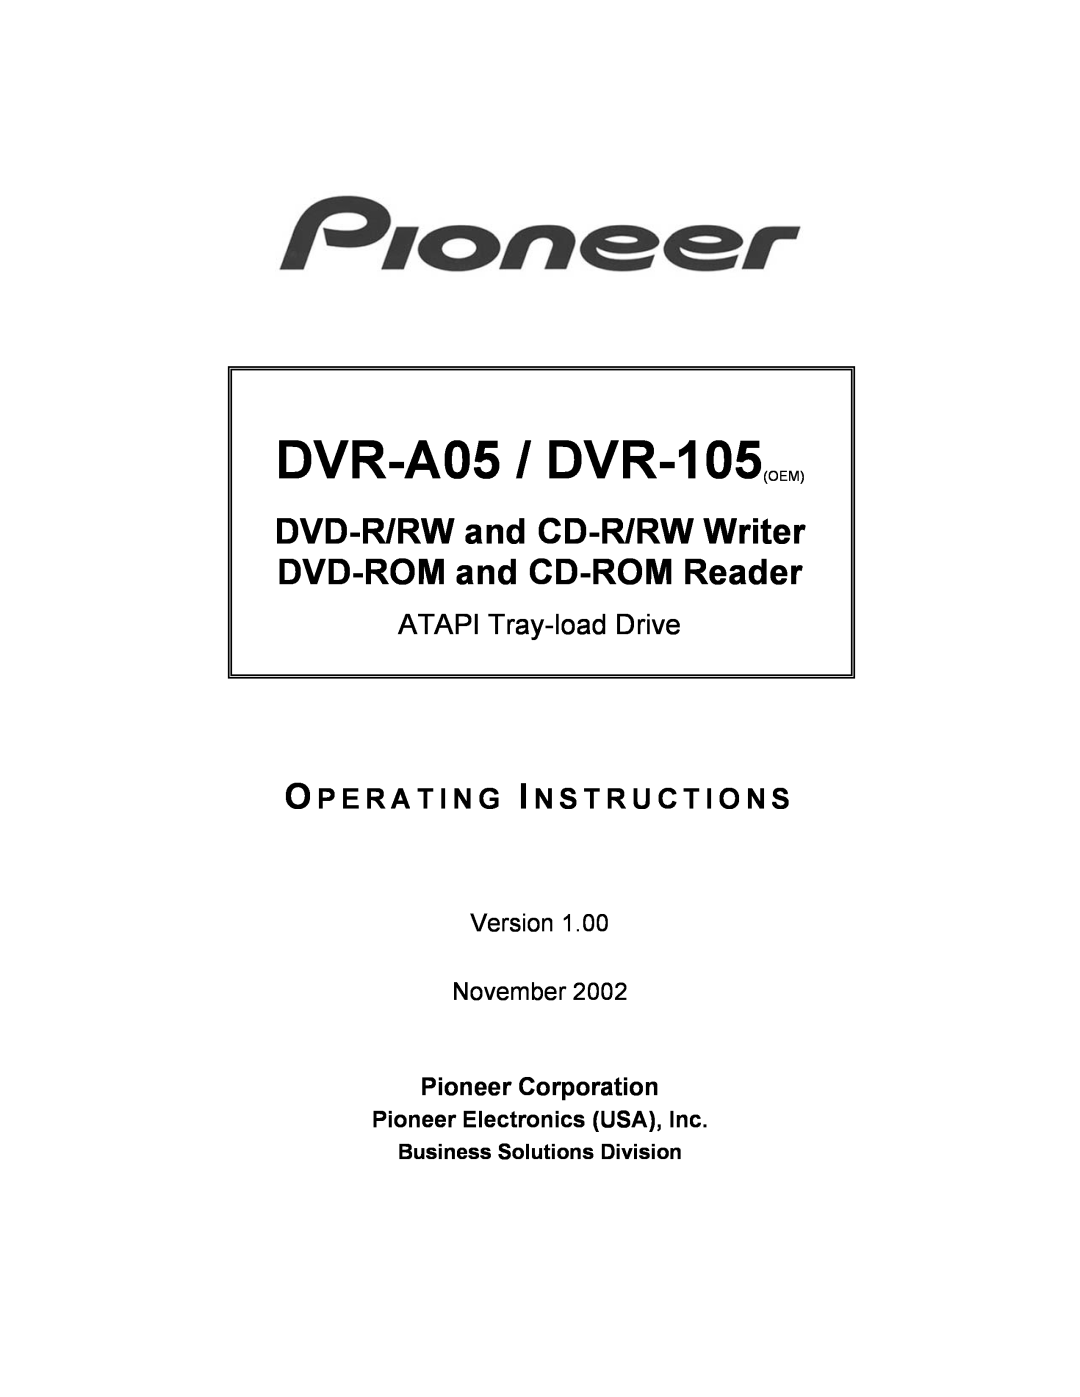 Pioneer DVR-A05, DVR-105 operating instructions ATAPI Tray-load Drive, Pioneer Corporation, Business Solutions Division 